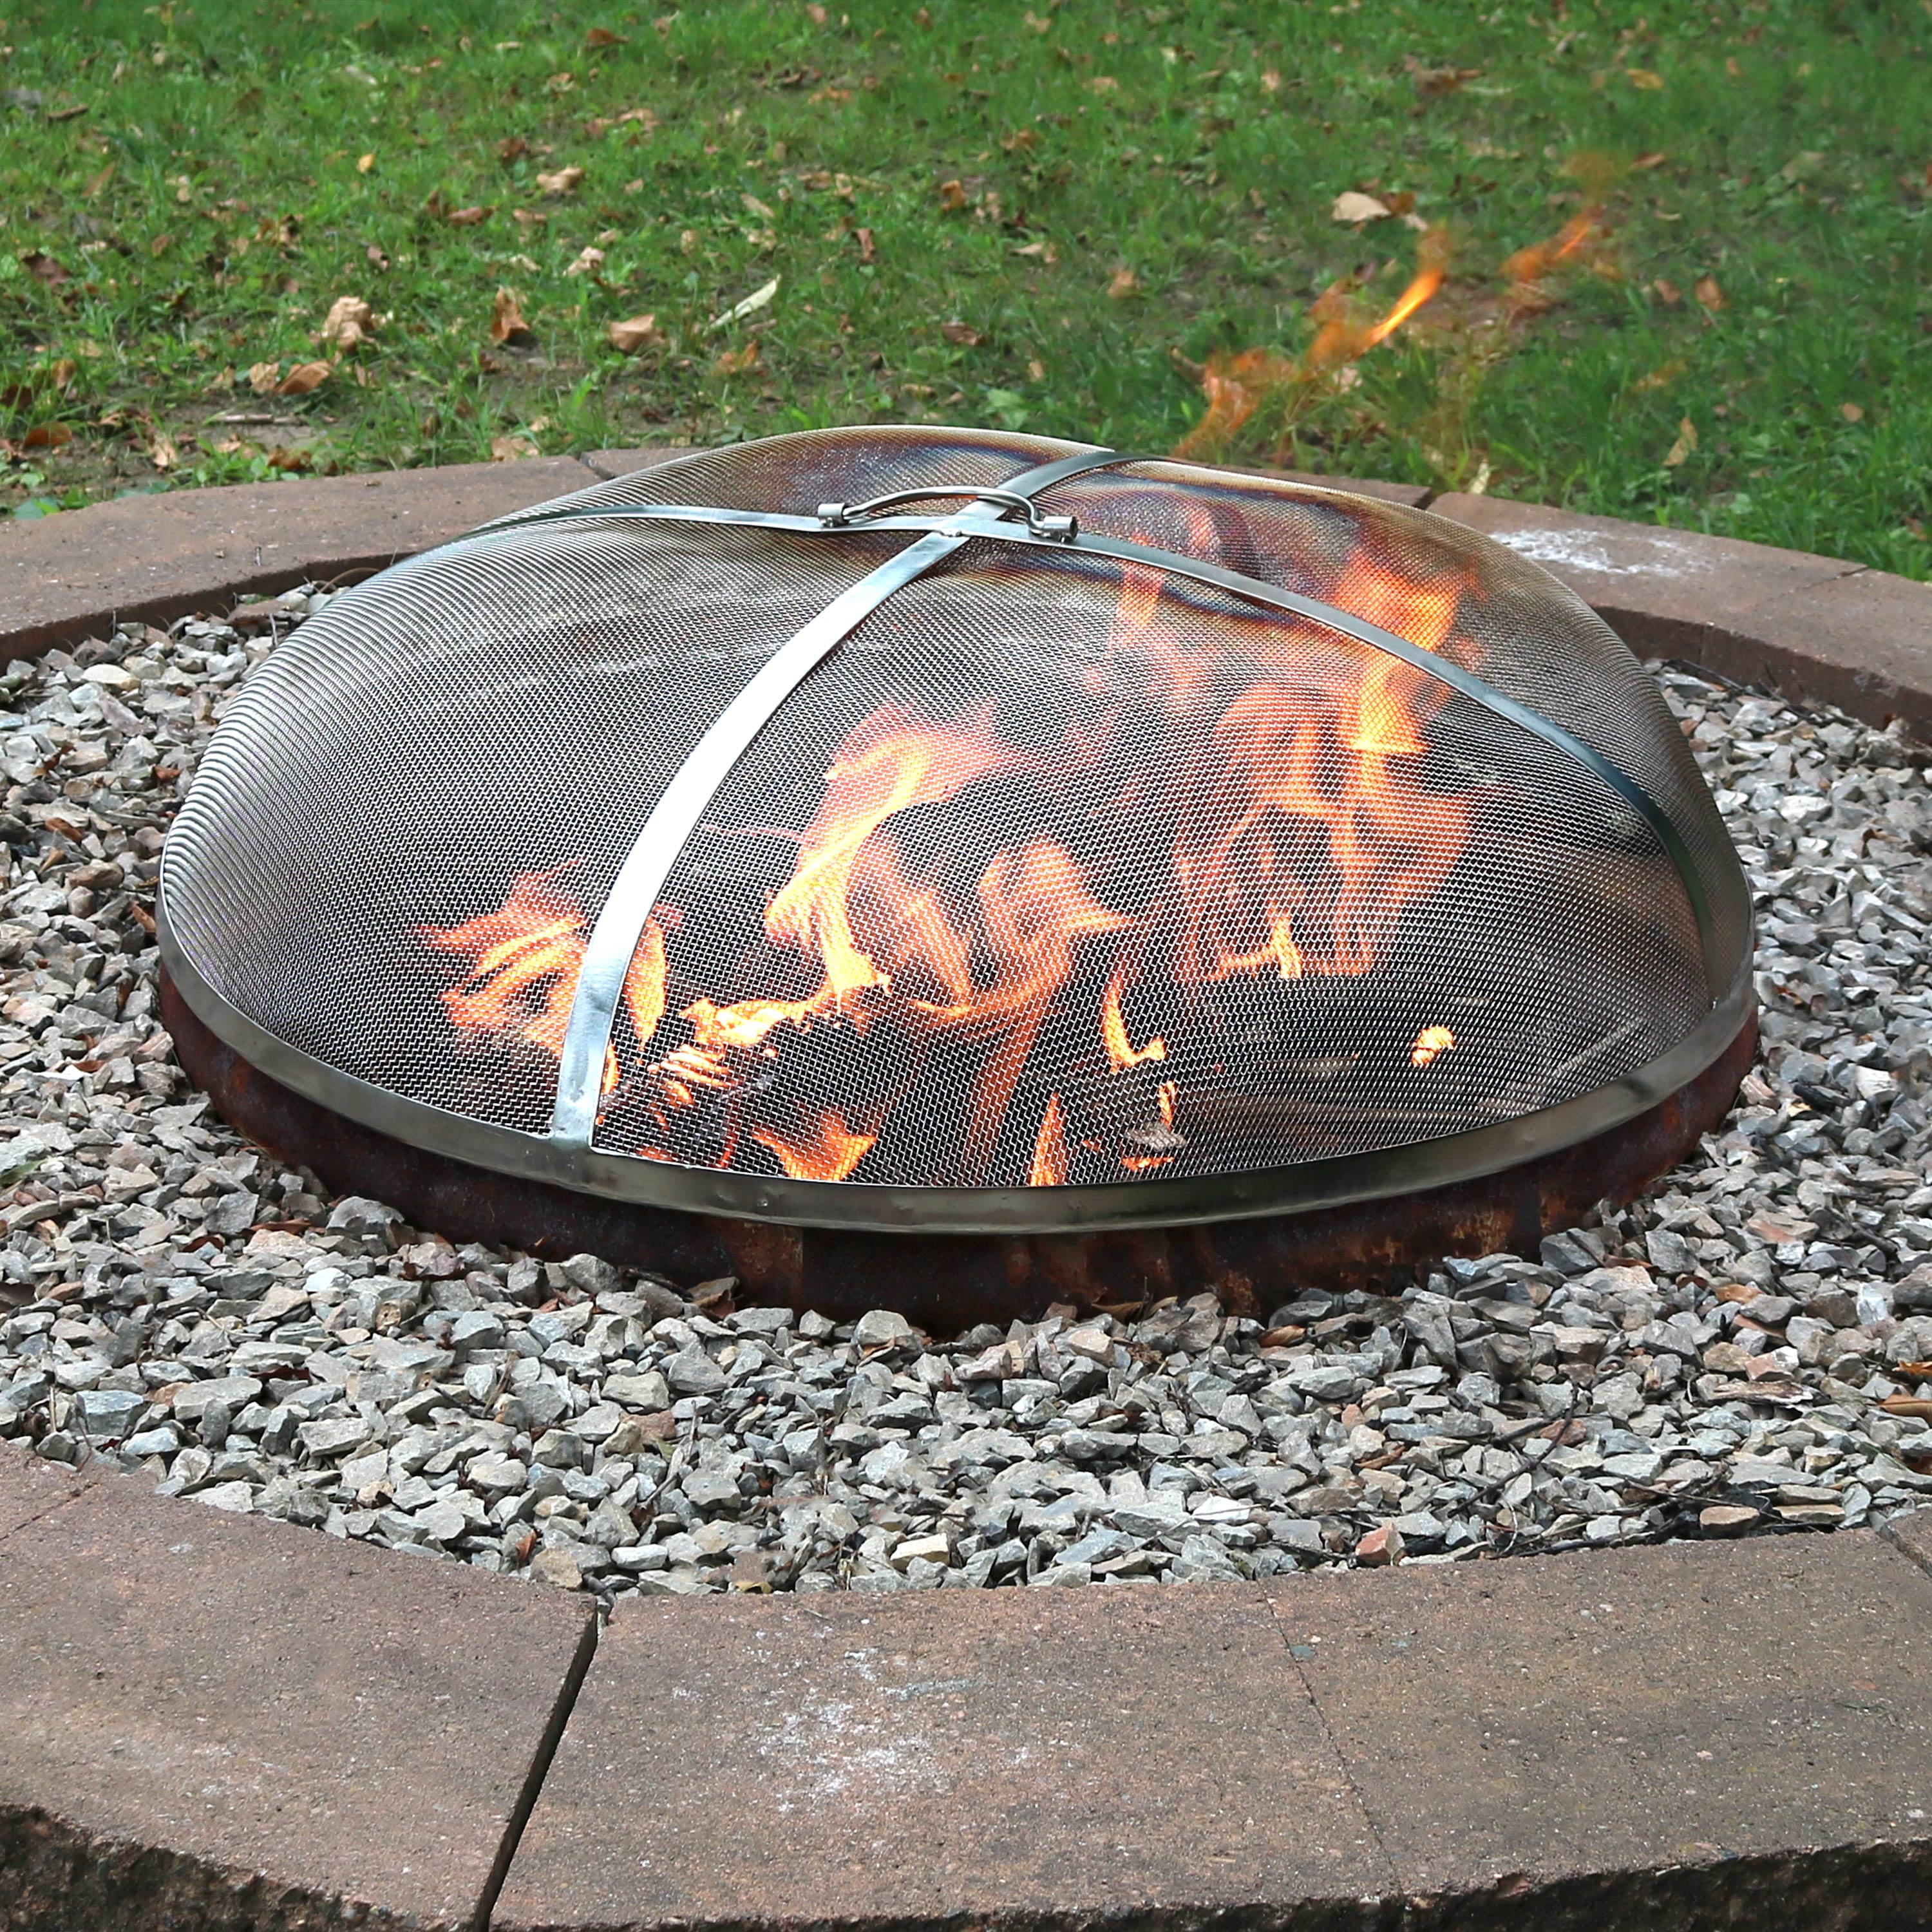 Sunnydaze Spark Screen 40 Stainless, Dome Cover For Fire Pit